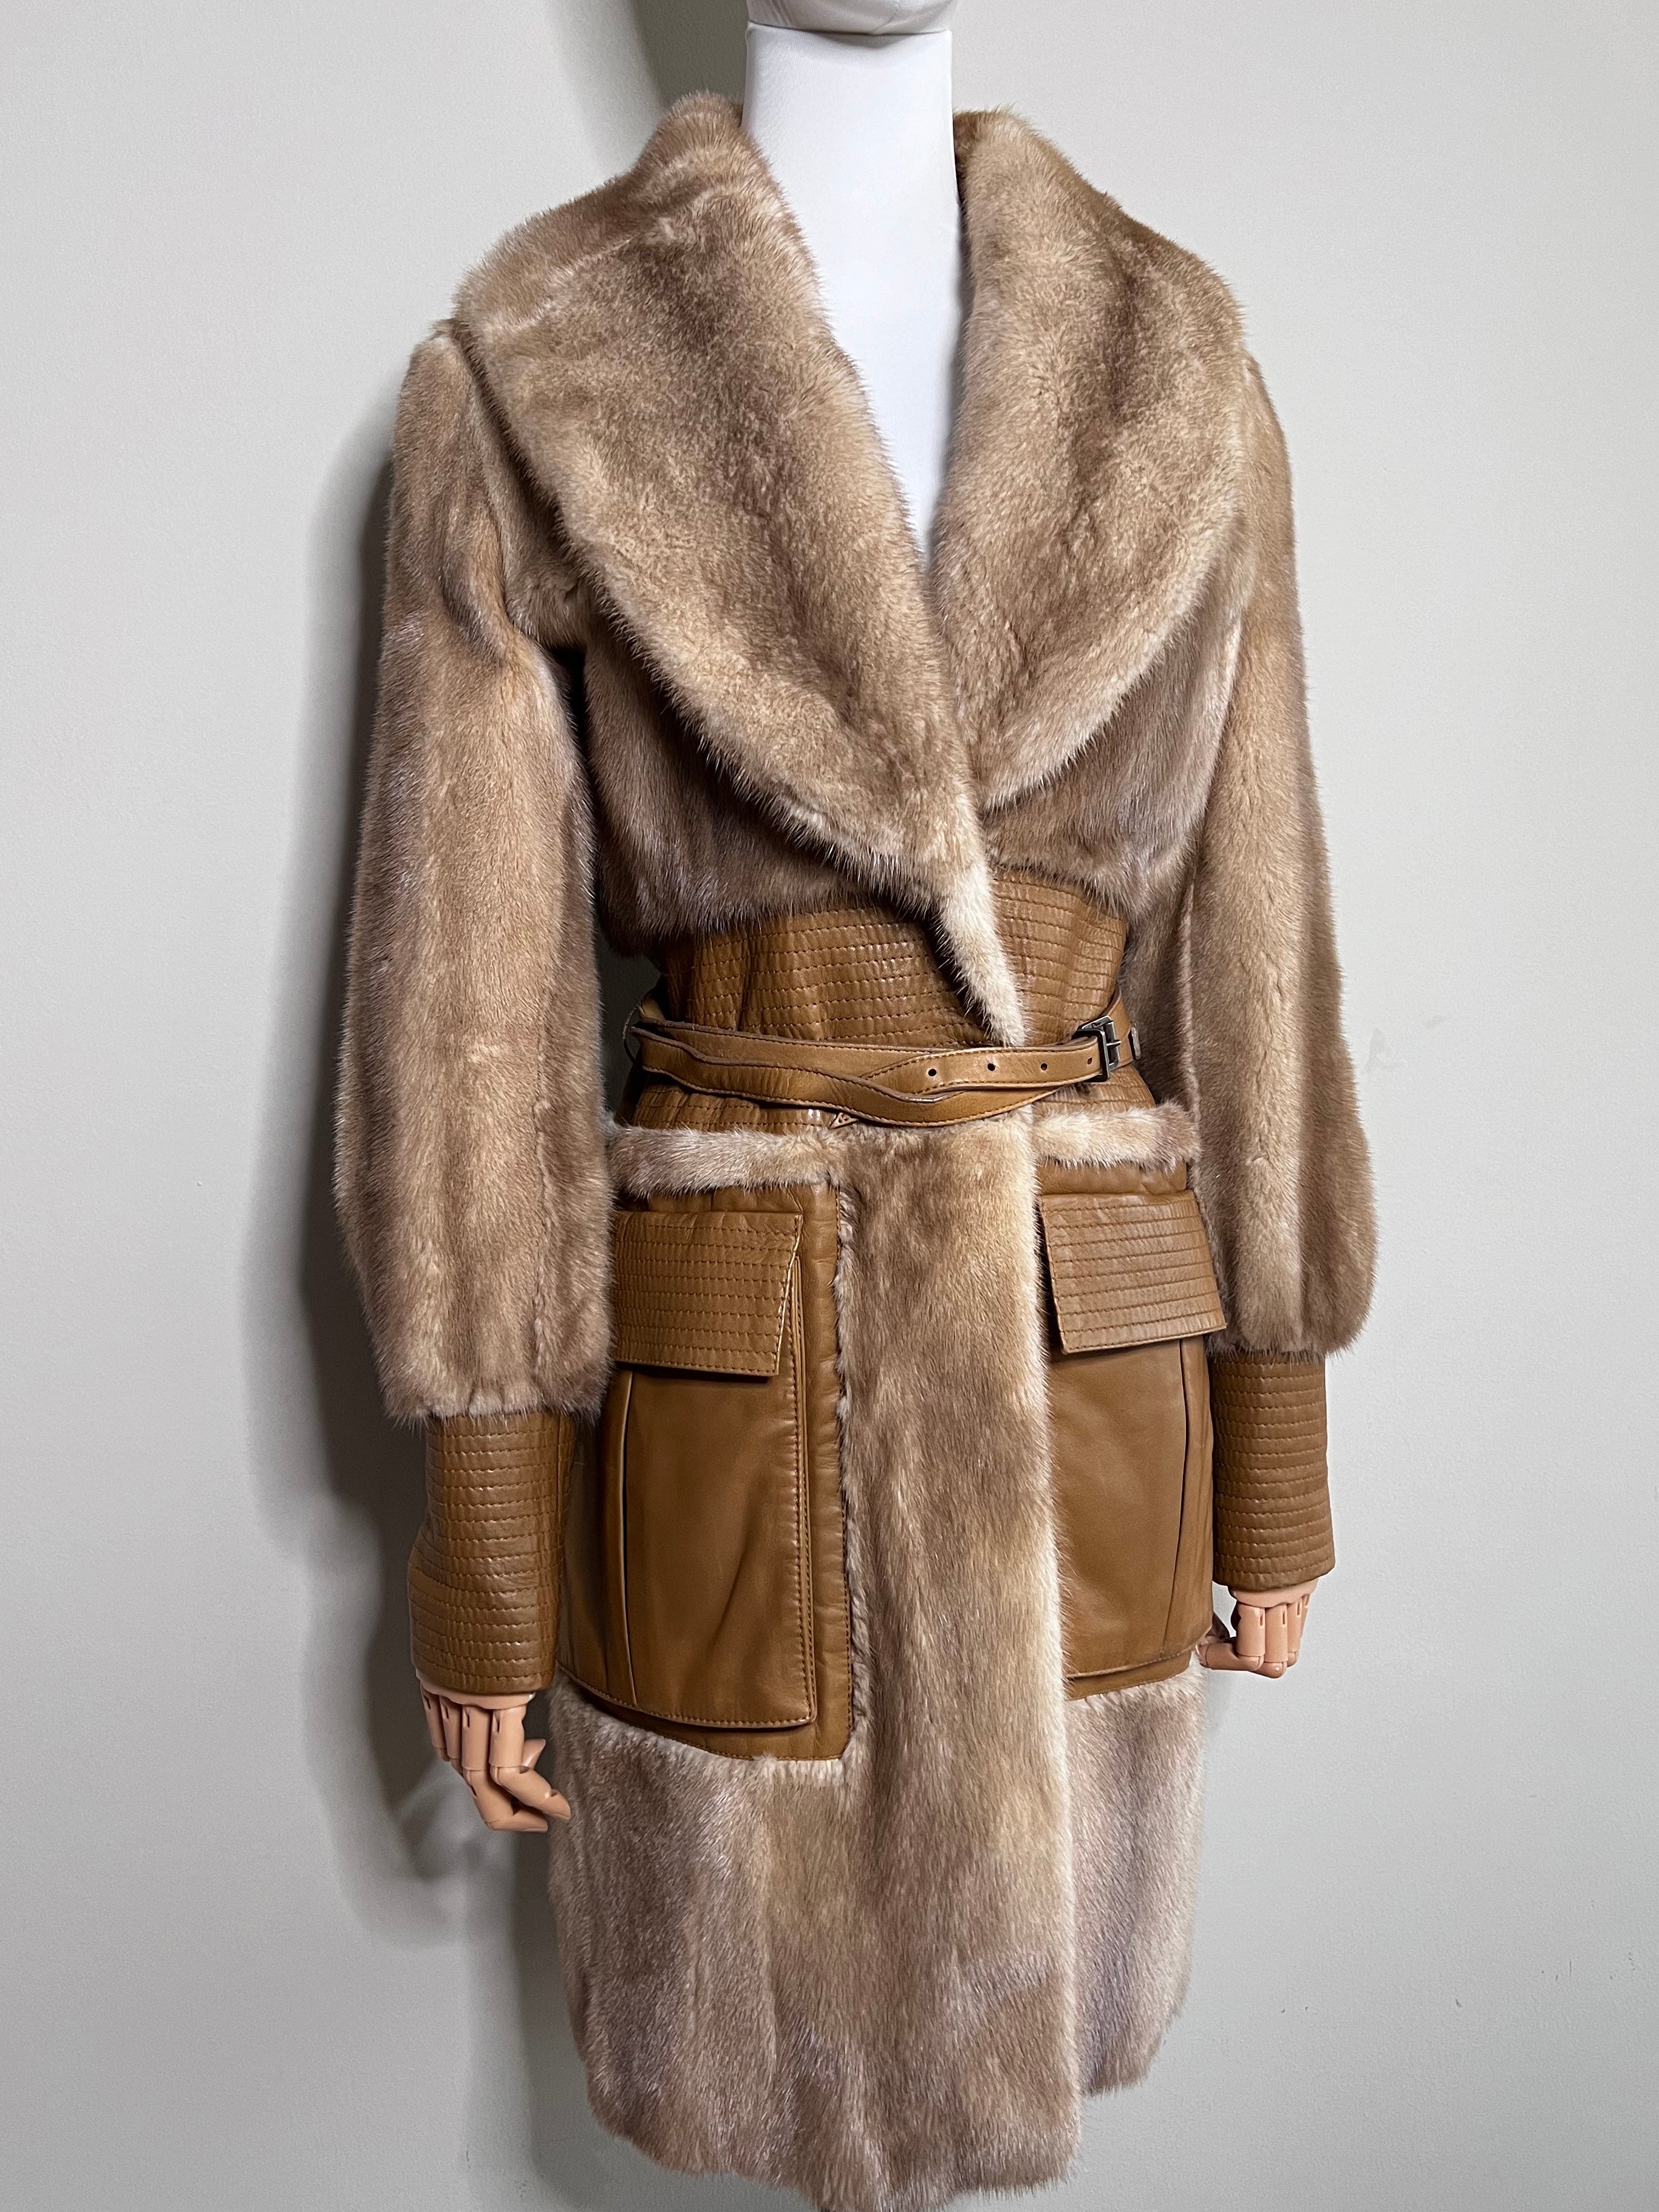 Brown Mink Coat With Nappa Leather Pockets Cuffs Waist Insert belted Jacket - CHRISTIAN DIOR